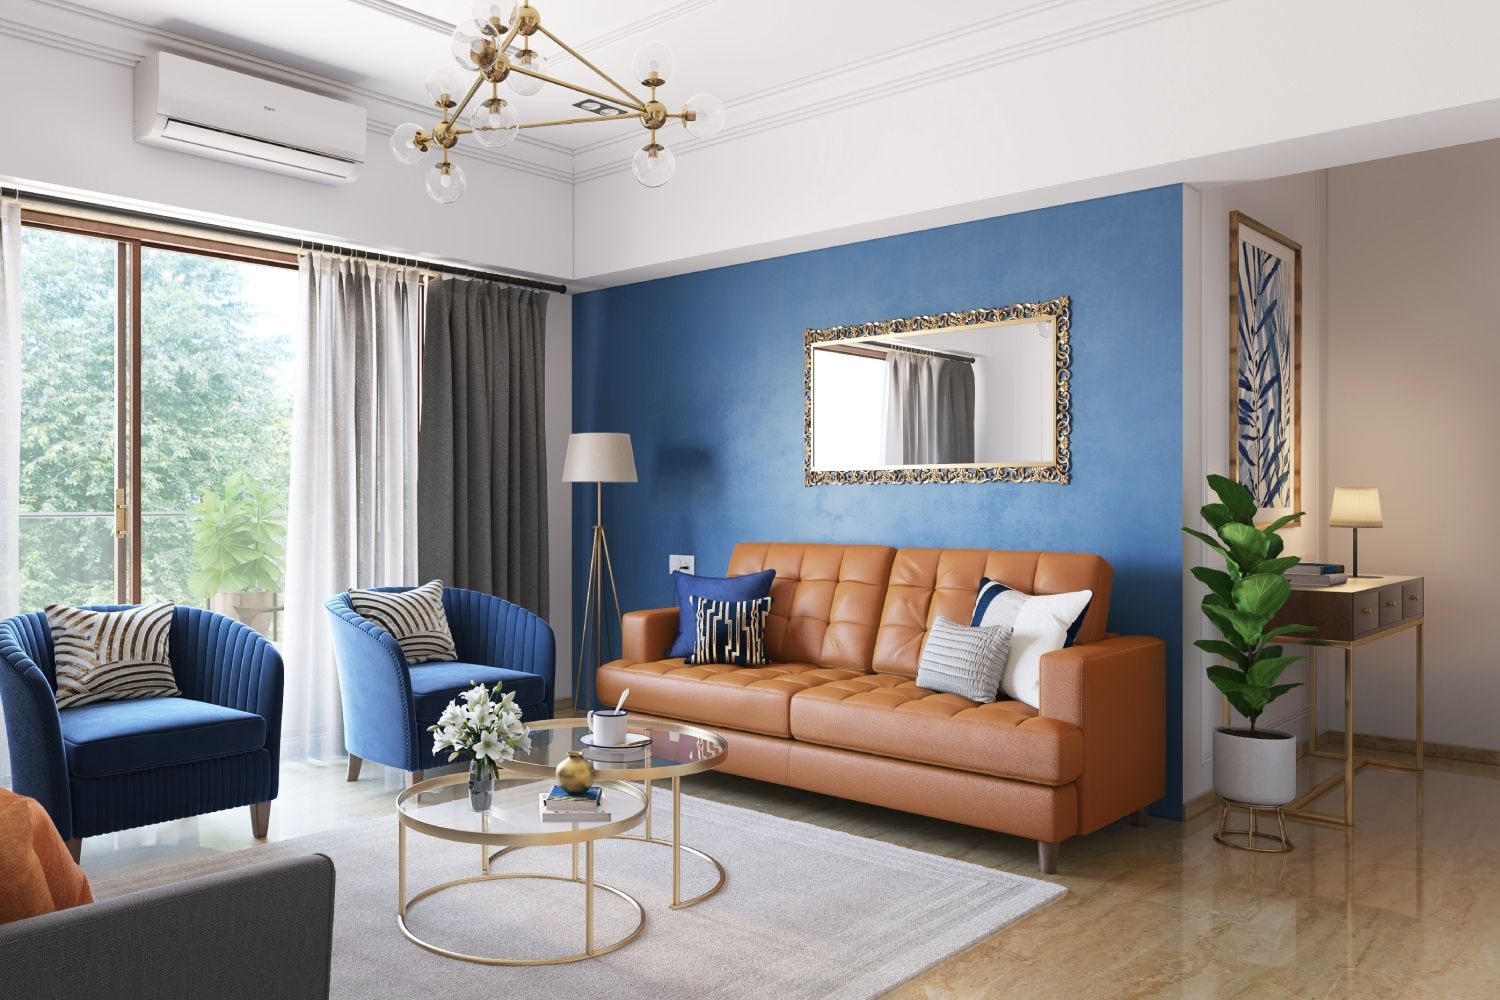 Modern Blue Living Room Wall Paint Design With Tan Brown And Dark Blue Sofa Set